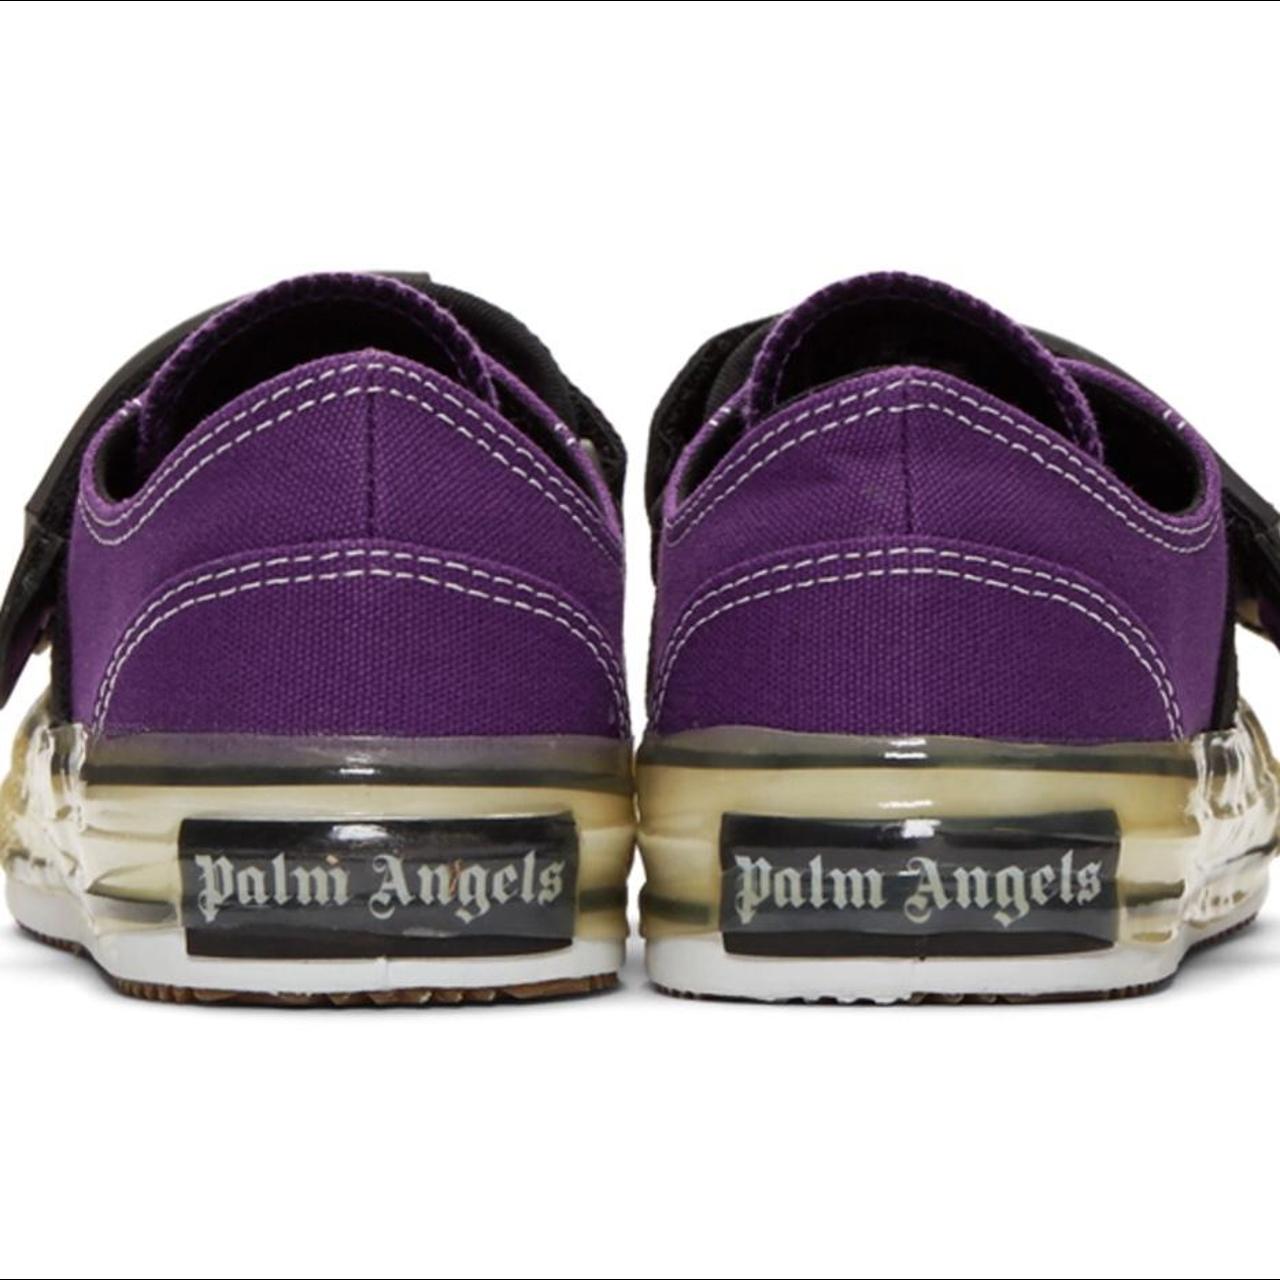 Product Image 3 - PALM ANGELS Velcro sneakers

No longer